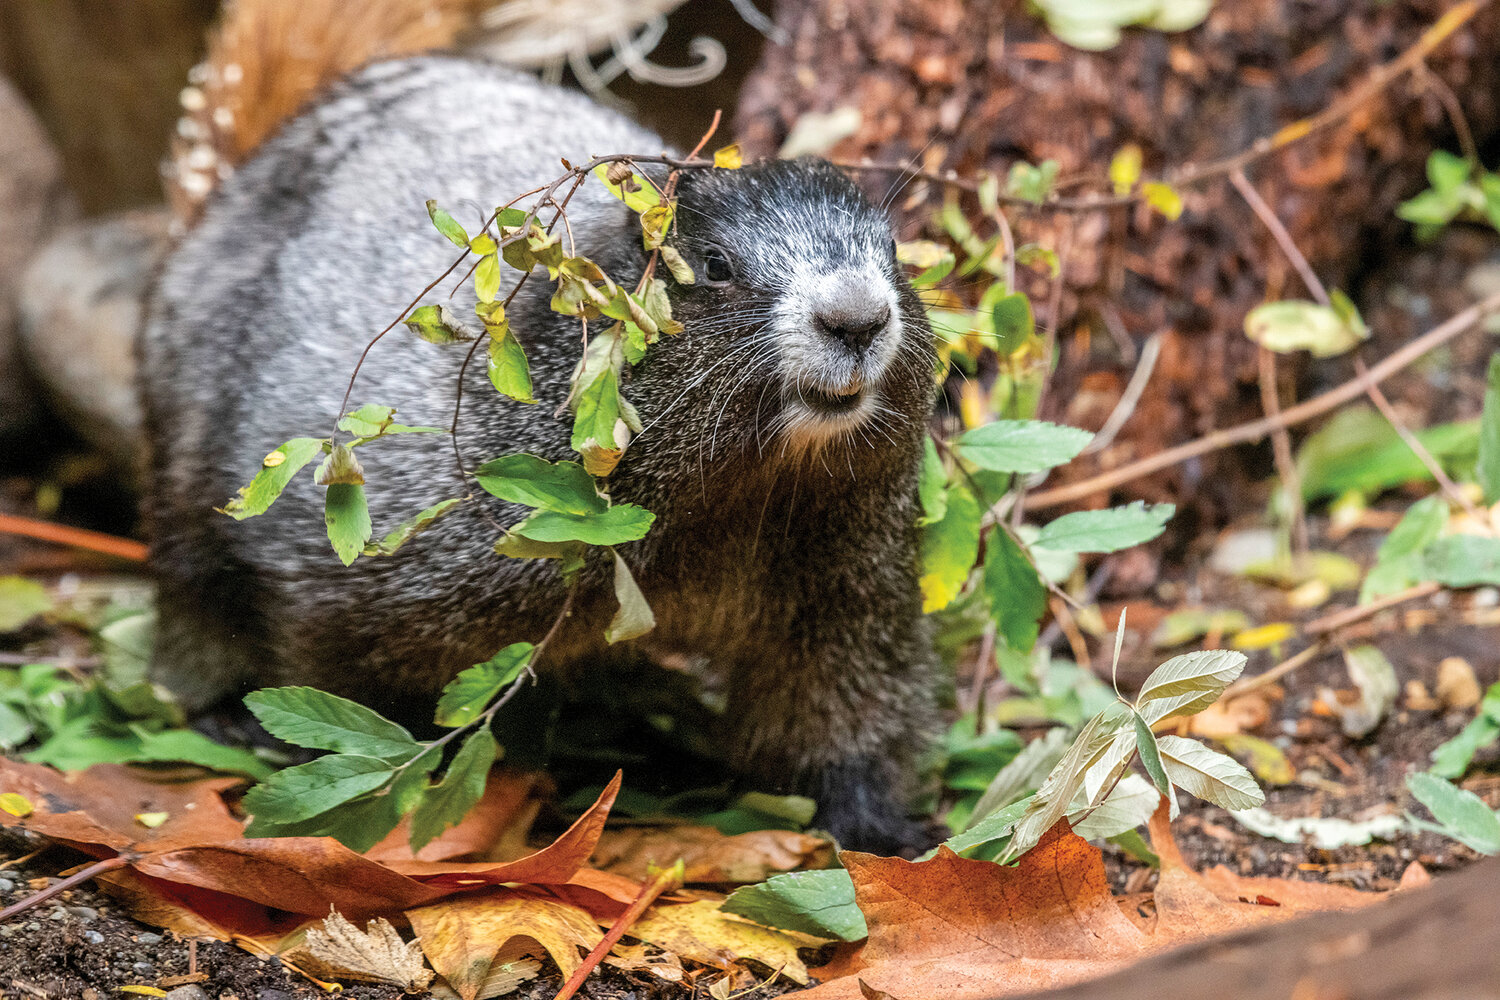 Chestnut the marmot, who originally lived in Mount Rainier National Park, has moved to Northwest Trek Wildlife Park in Eatonville after becoming acclimated to humans and aggressively begging for food.